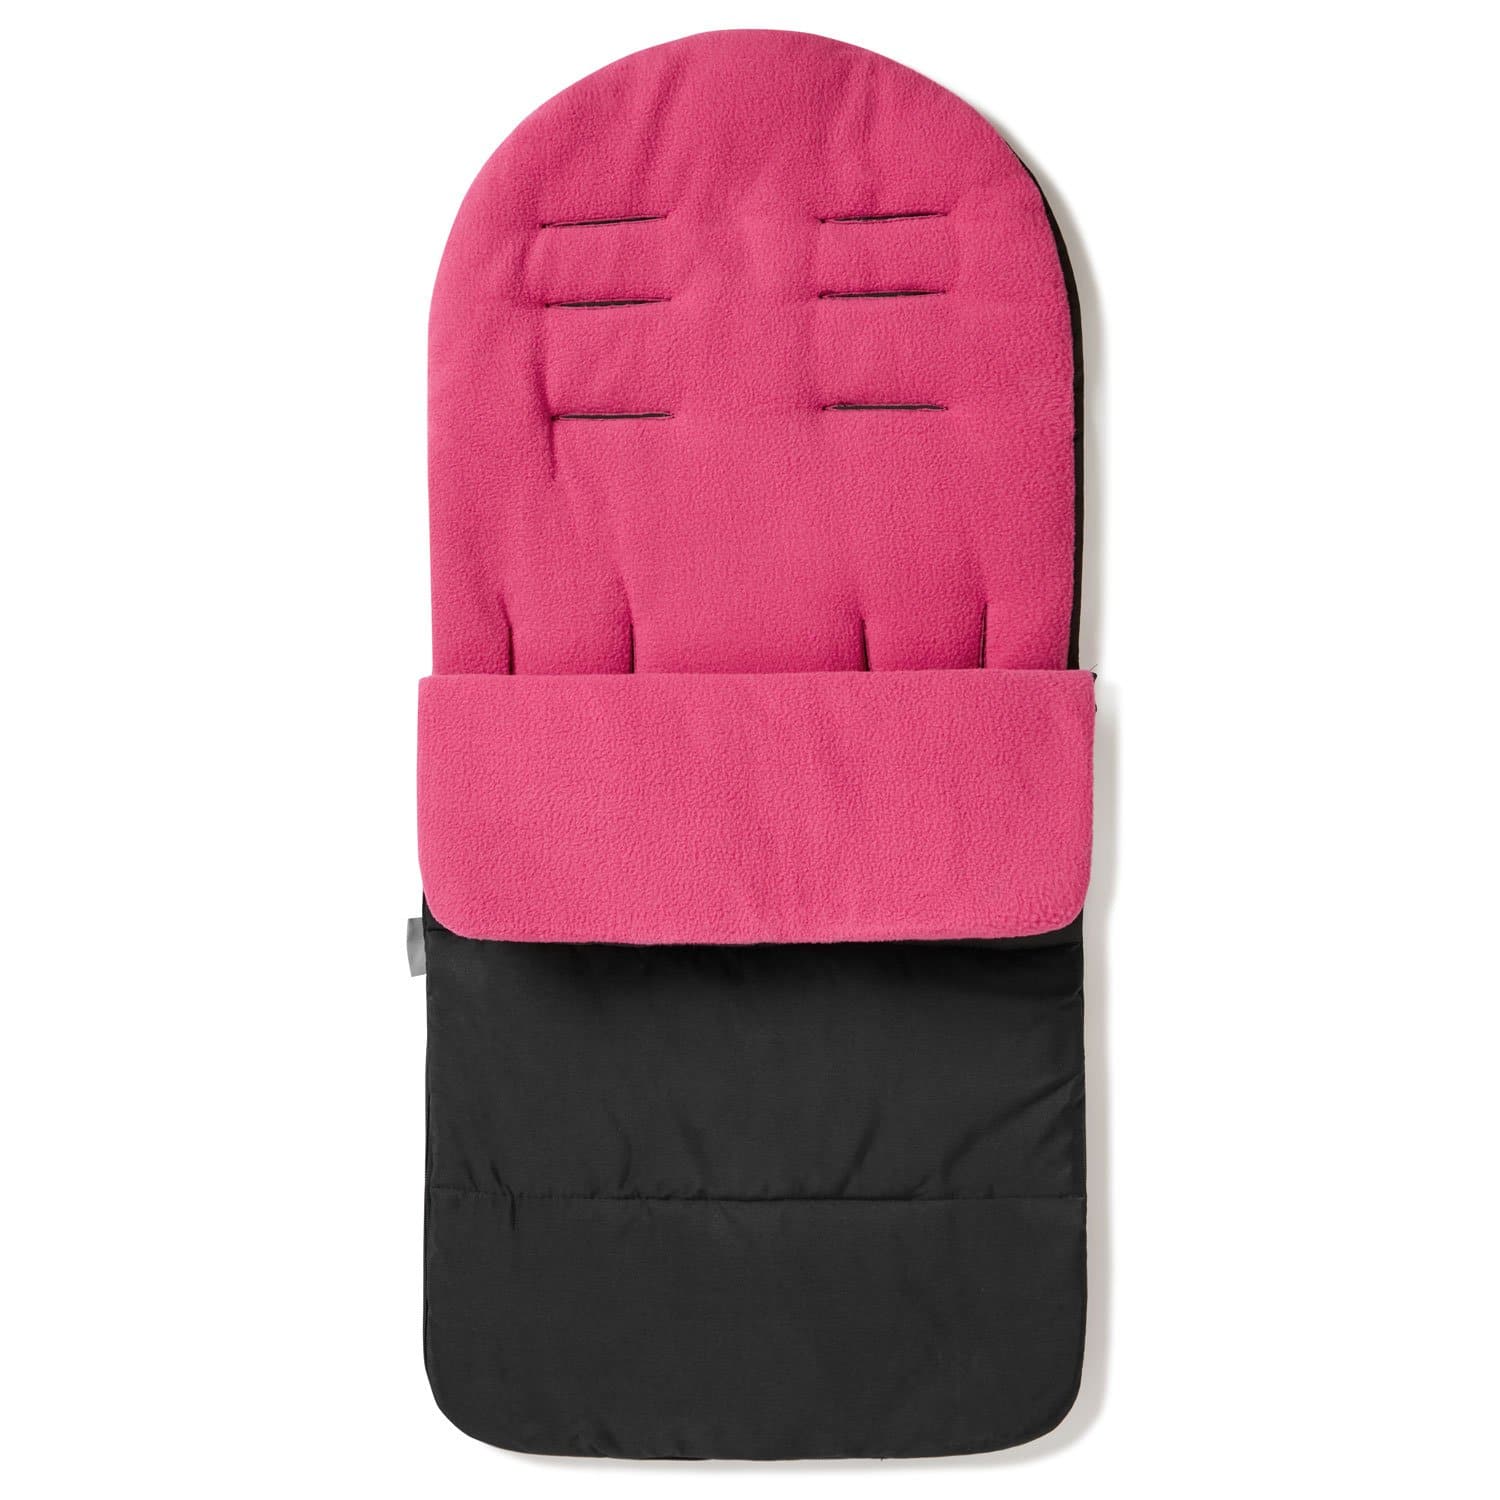 Premium Footmuff / Cosy Toes Compatible with Babystyle - Pink Rose / Fits All Models | For Your Little One